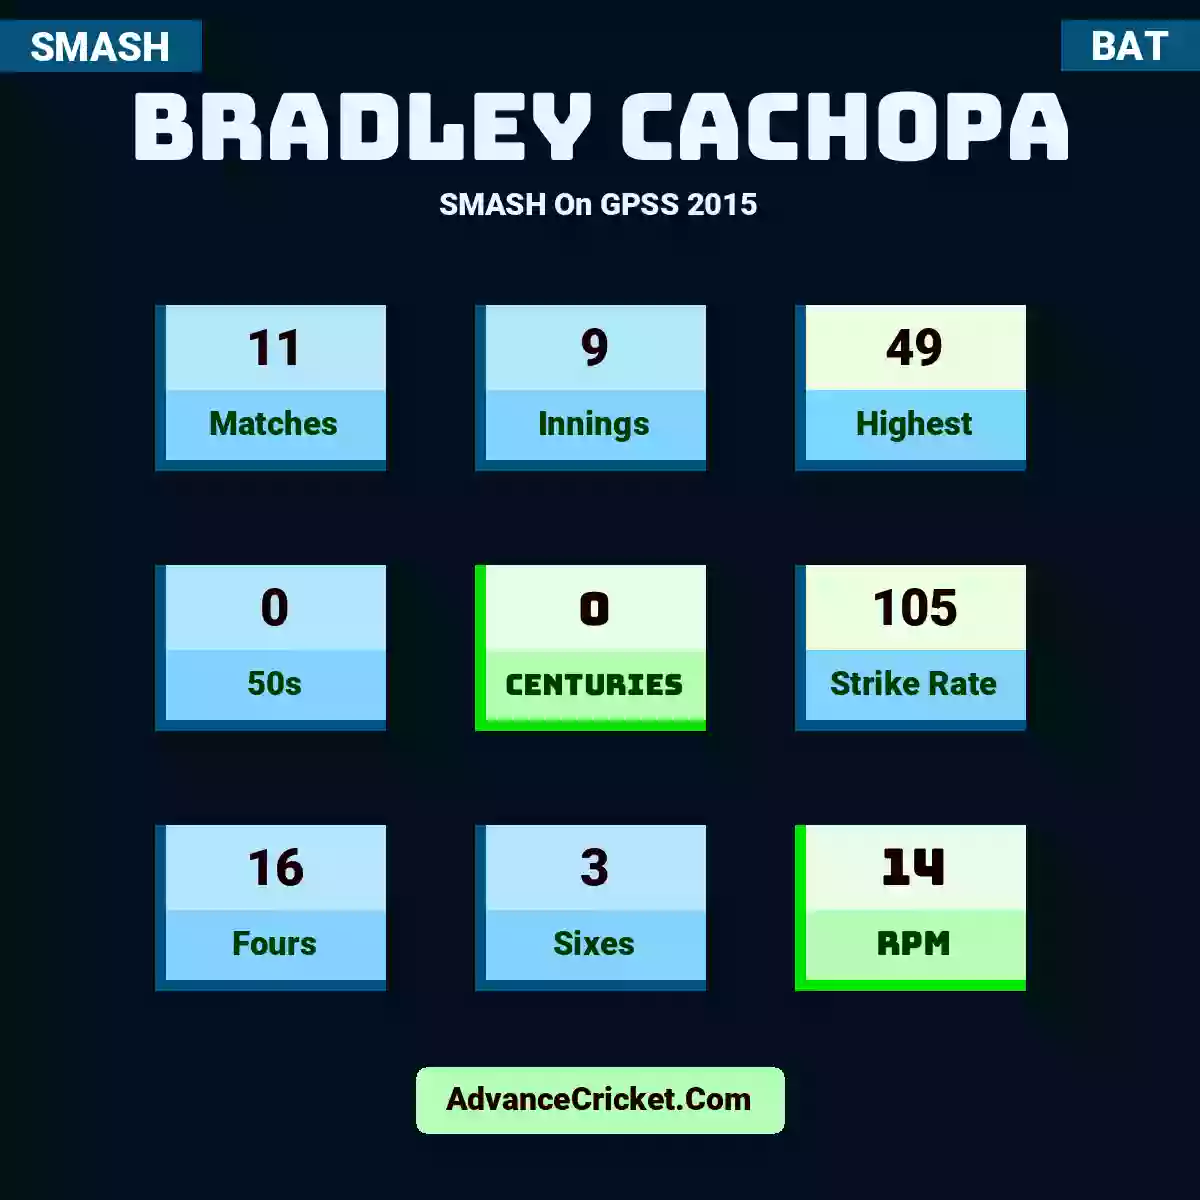 Bradley Cachopa SMASH  On GPSS 2015, Bradley Cachopa played 11 matches, scored 49 runs as highest, 0 half-centuries, and 0 centuries, with a strike rate of 105. B.Cachopa hit 16 fours and 3 sixes, with an RPM of 14.